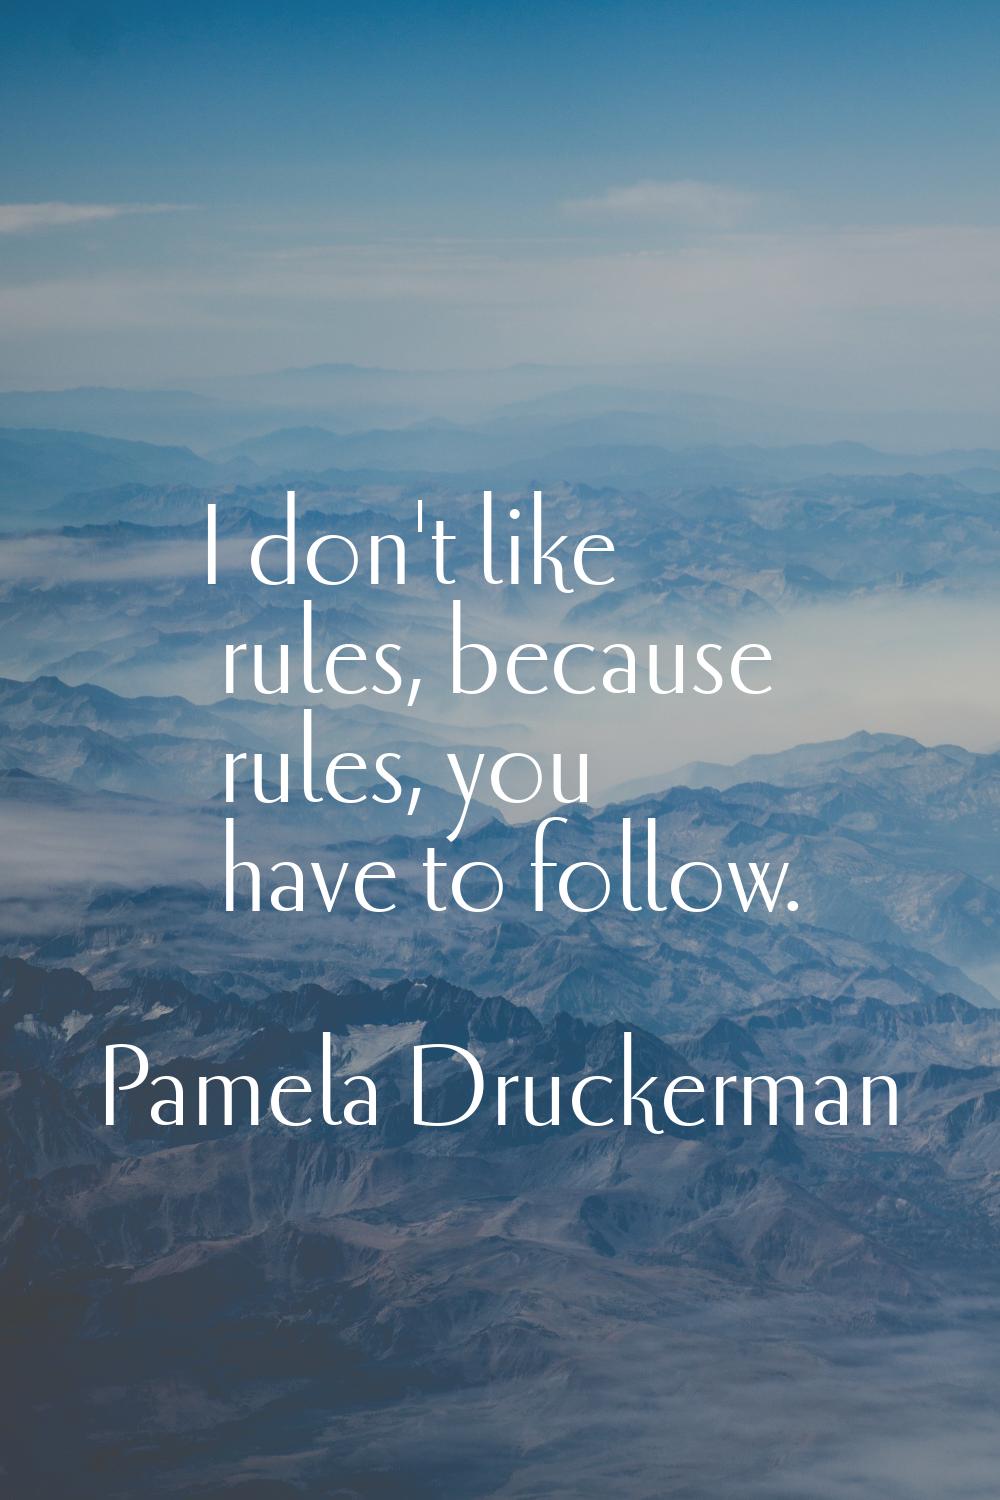 I don't like rules, because rules, you have to follow.